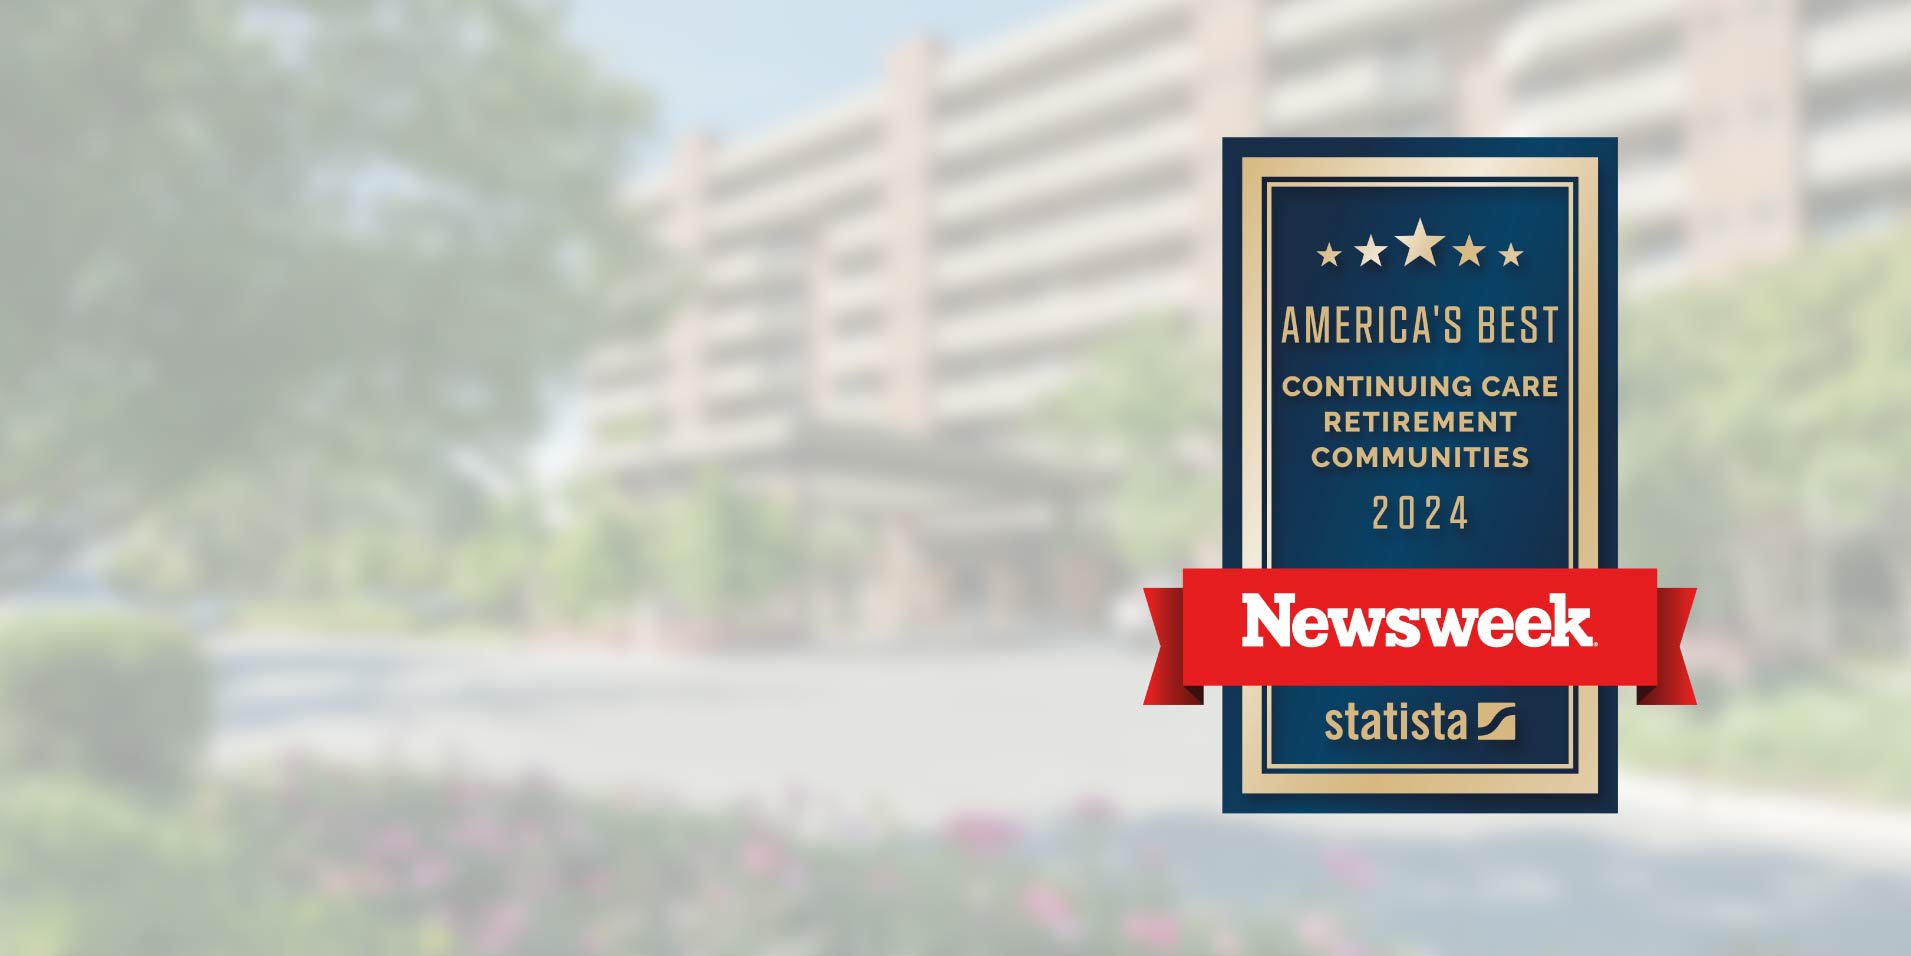 blurred background of Roland Park Place and a Newsweek & Statista graphic to the right for America’s Best Continuing Care Retirement Communities 2024